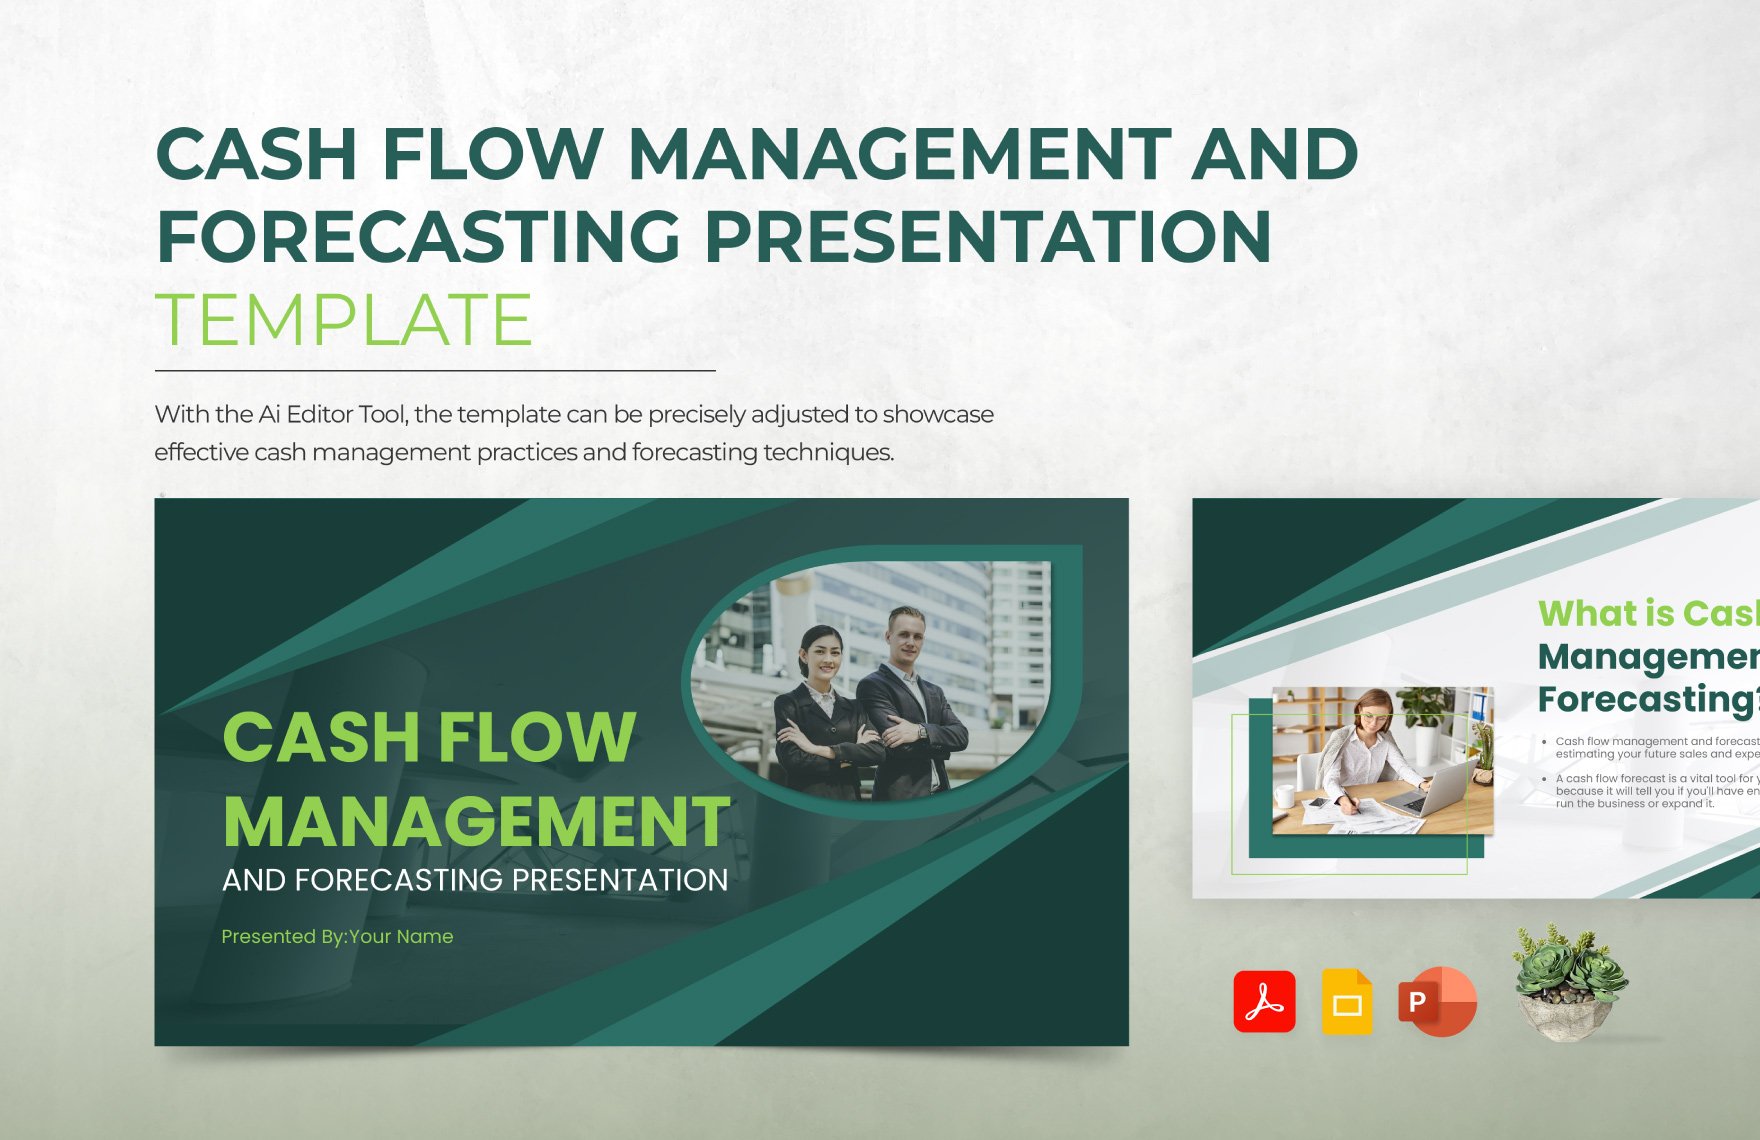 Free Cash Flow Management and Forecasting Presentation Template in PDF, PowerPoint, Google Slides